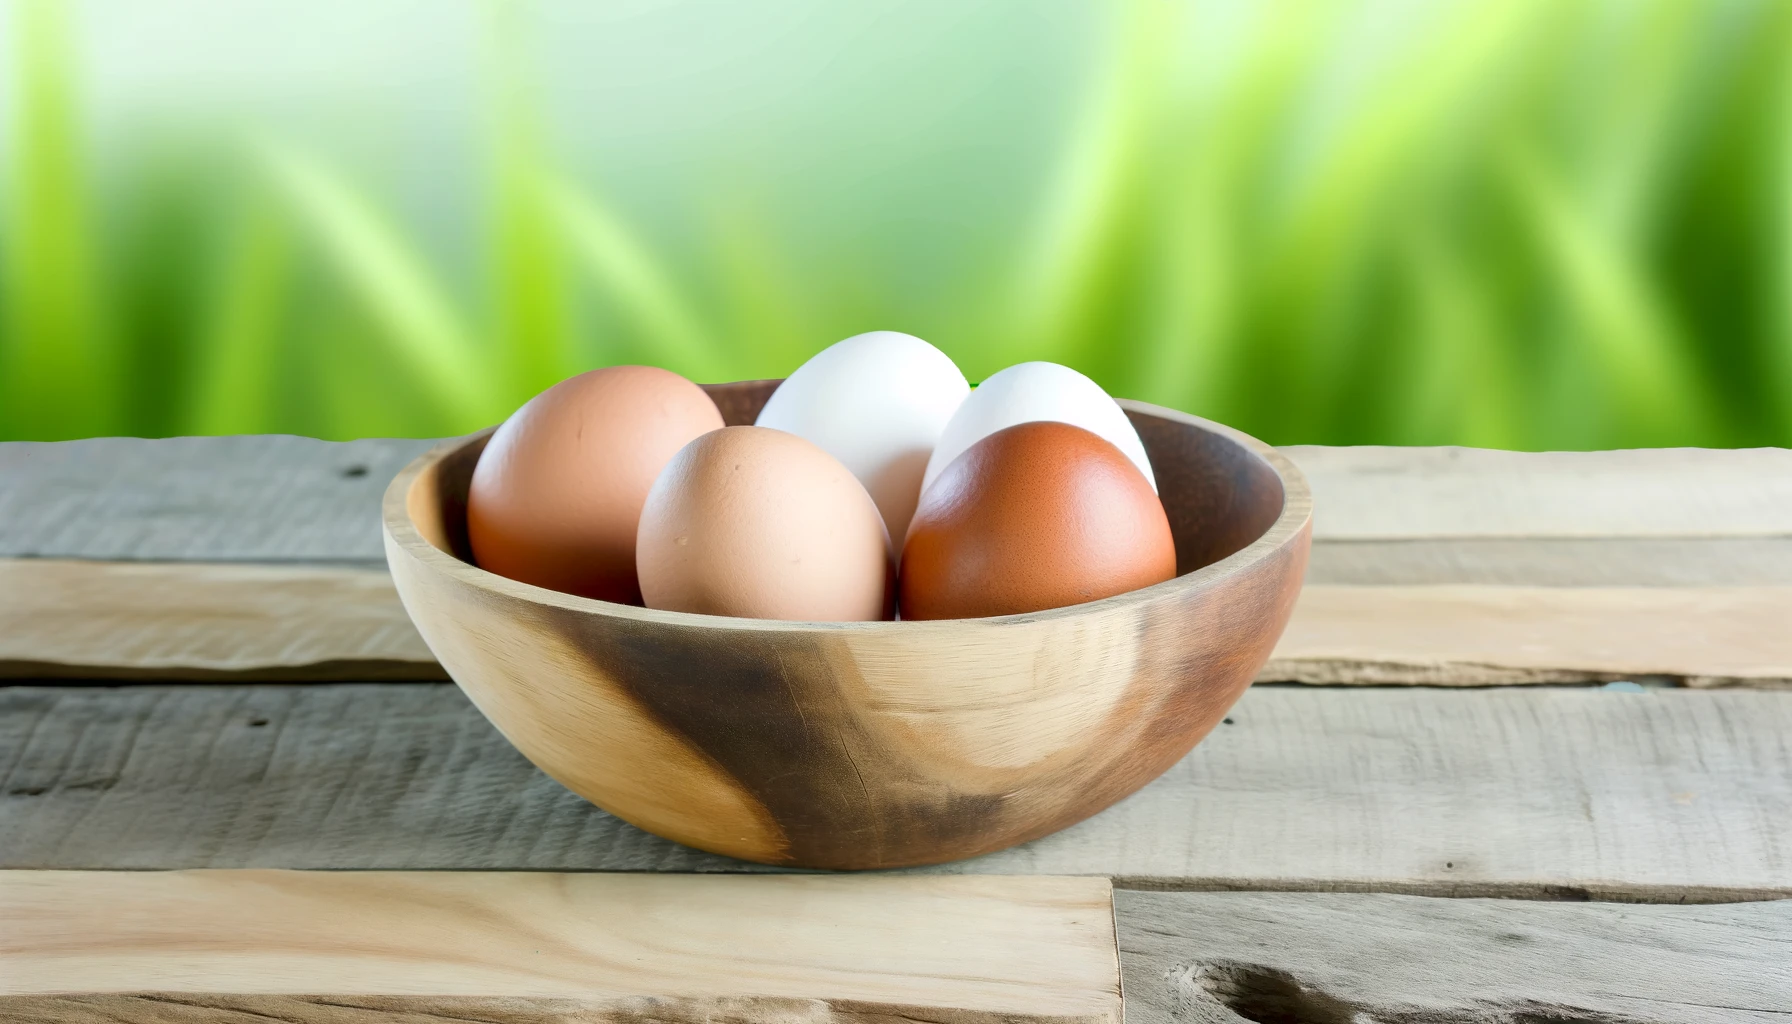 A rustic wooden bowl filled with fresh chicken eggs both white and brown shells on a wooden table. The background features softly blurred green plan